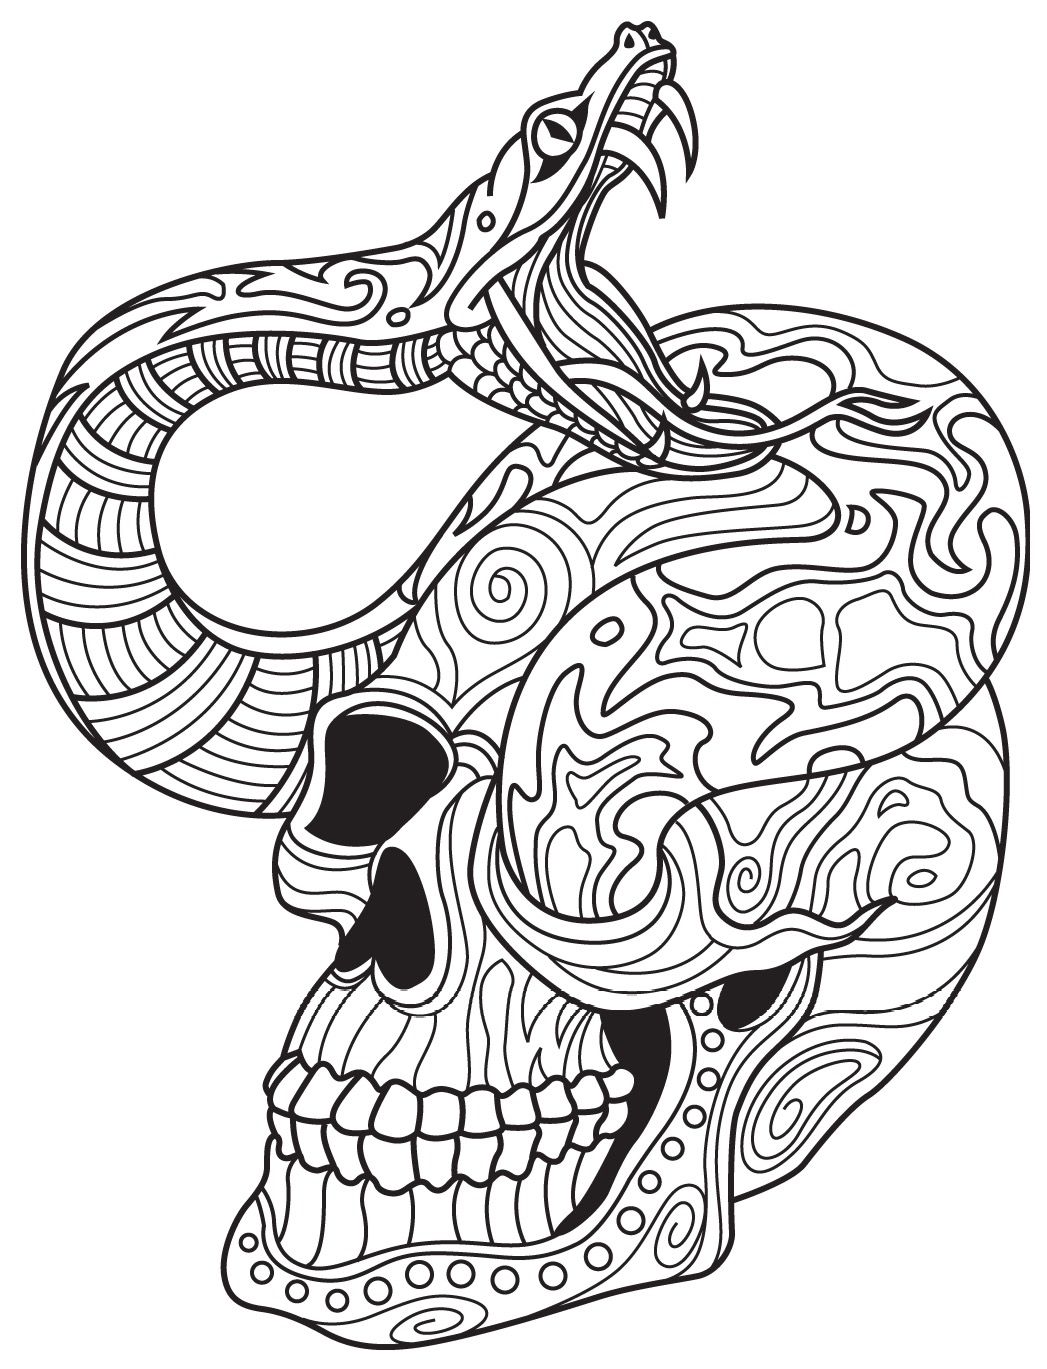 Snake And Skull Colorish Coloring Book App For Adults